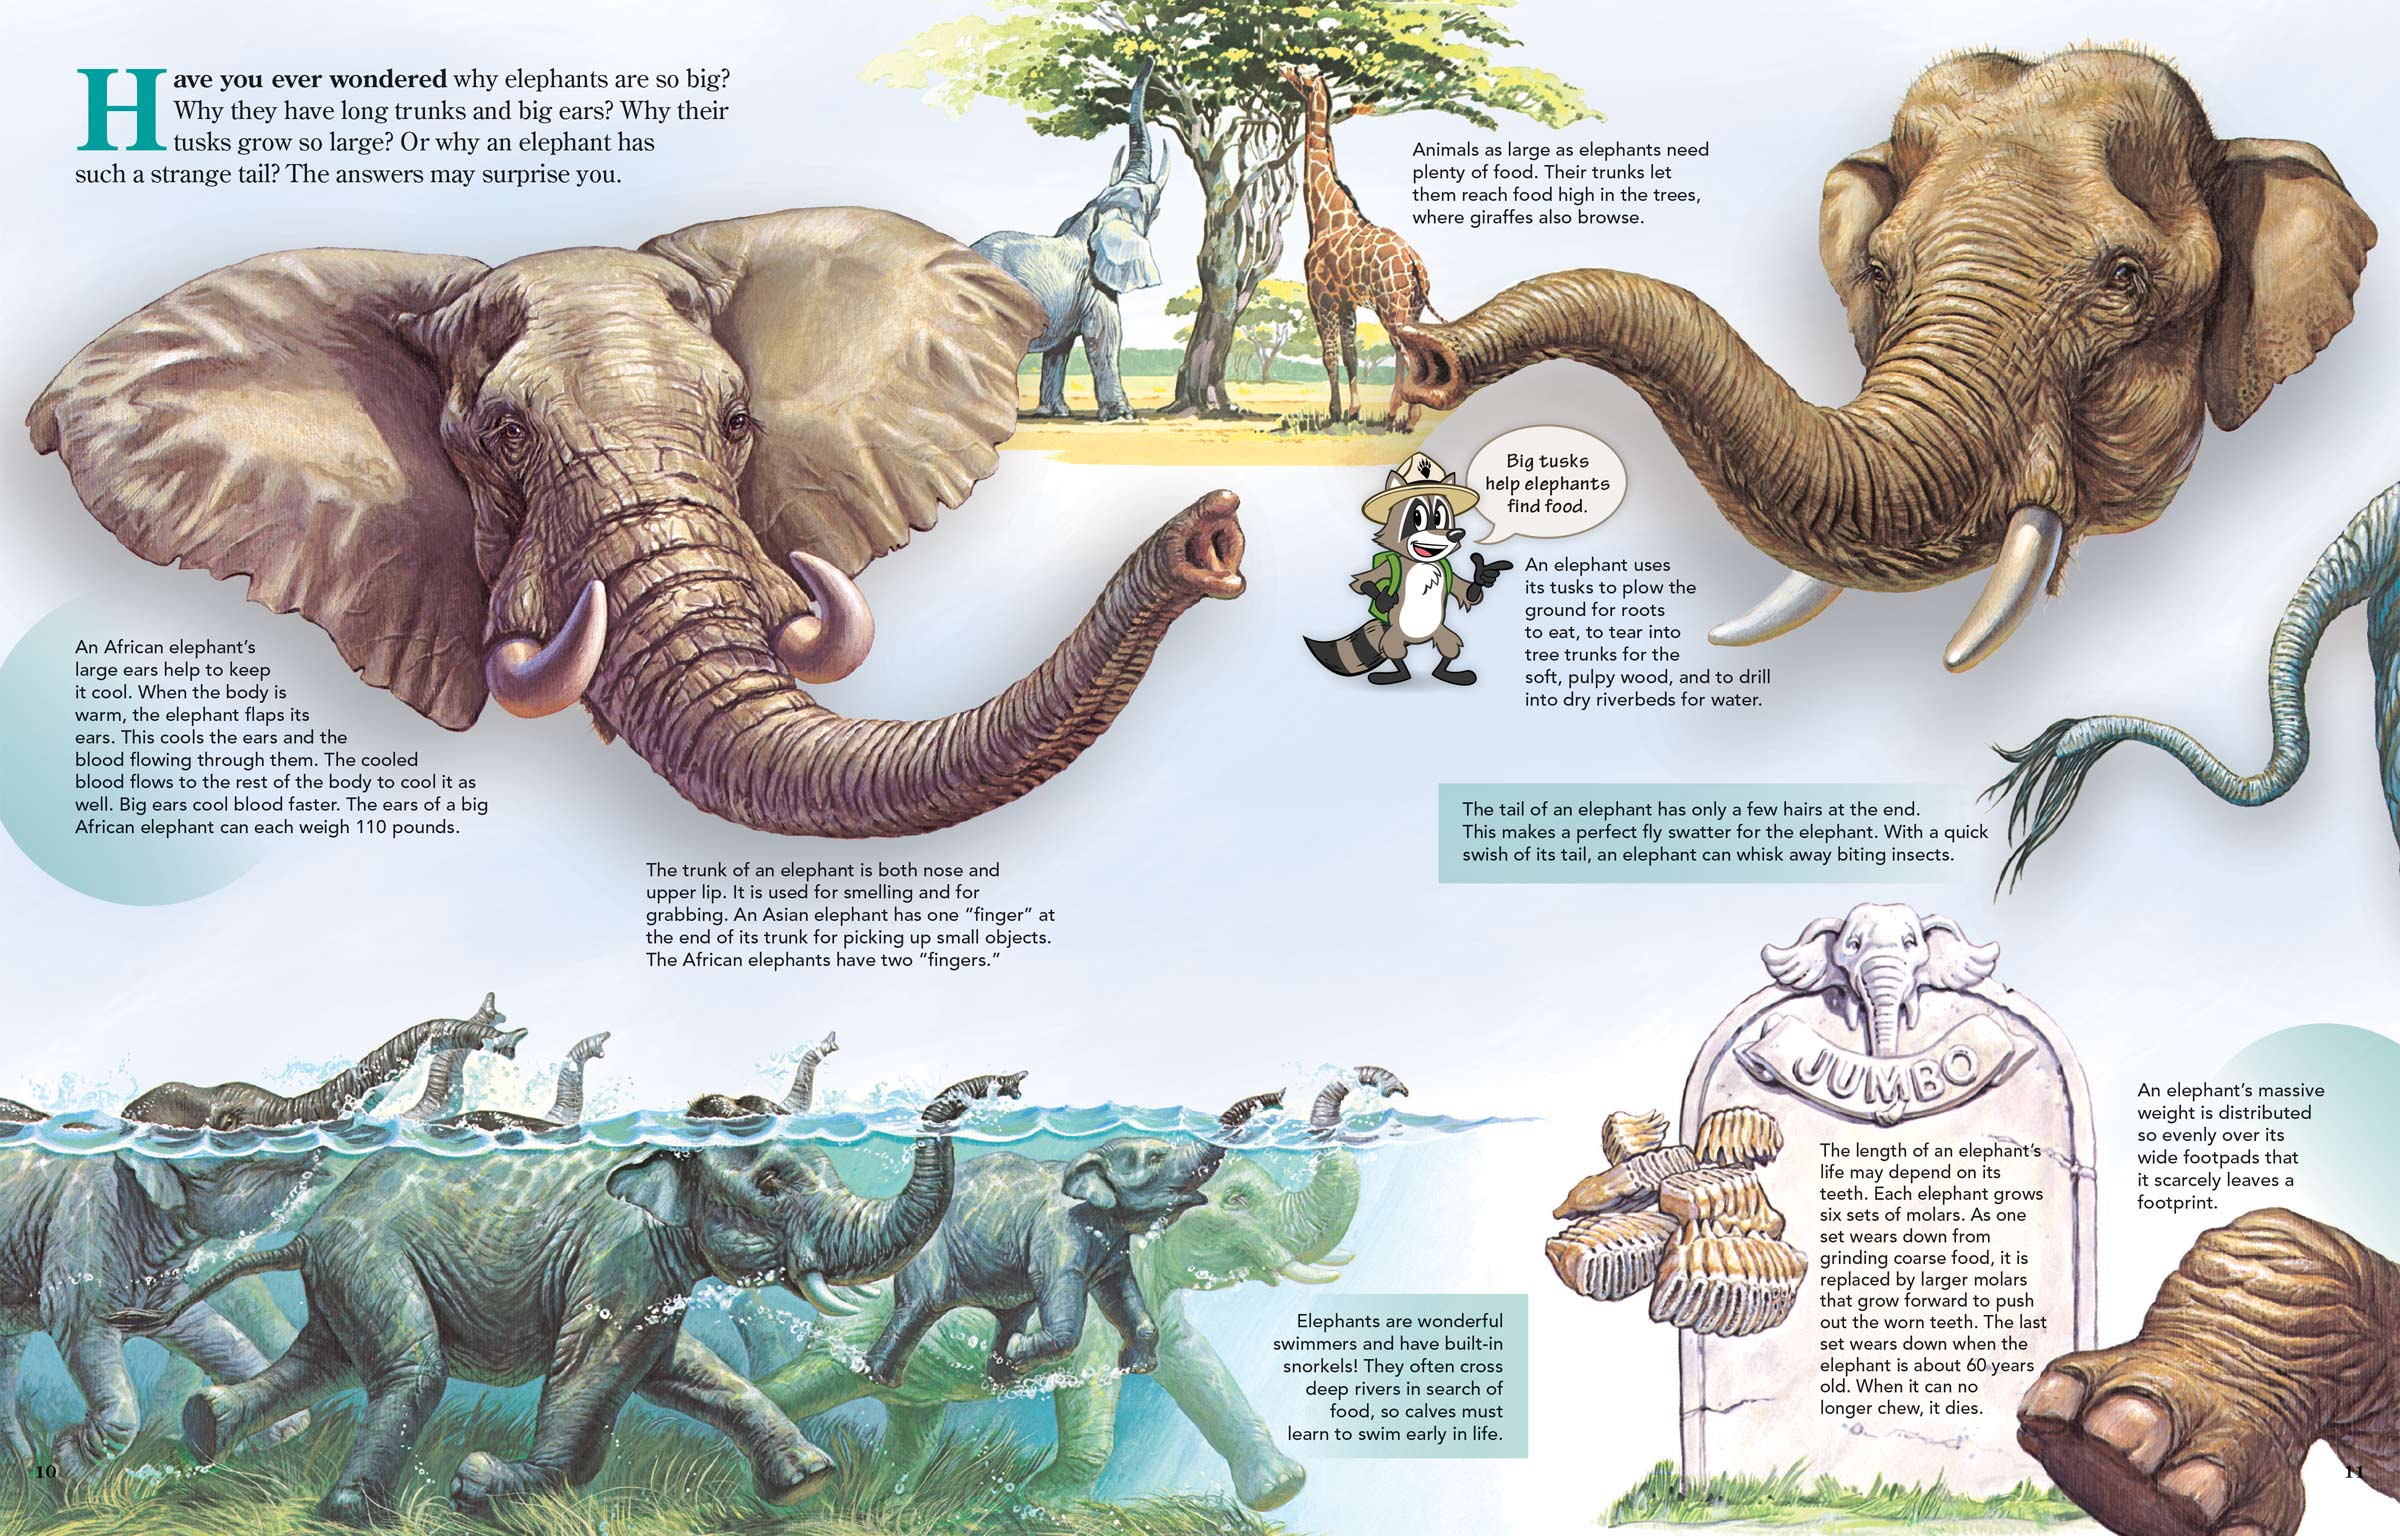 Fun information about what makes elephants special.